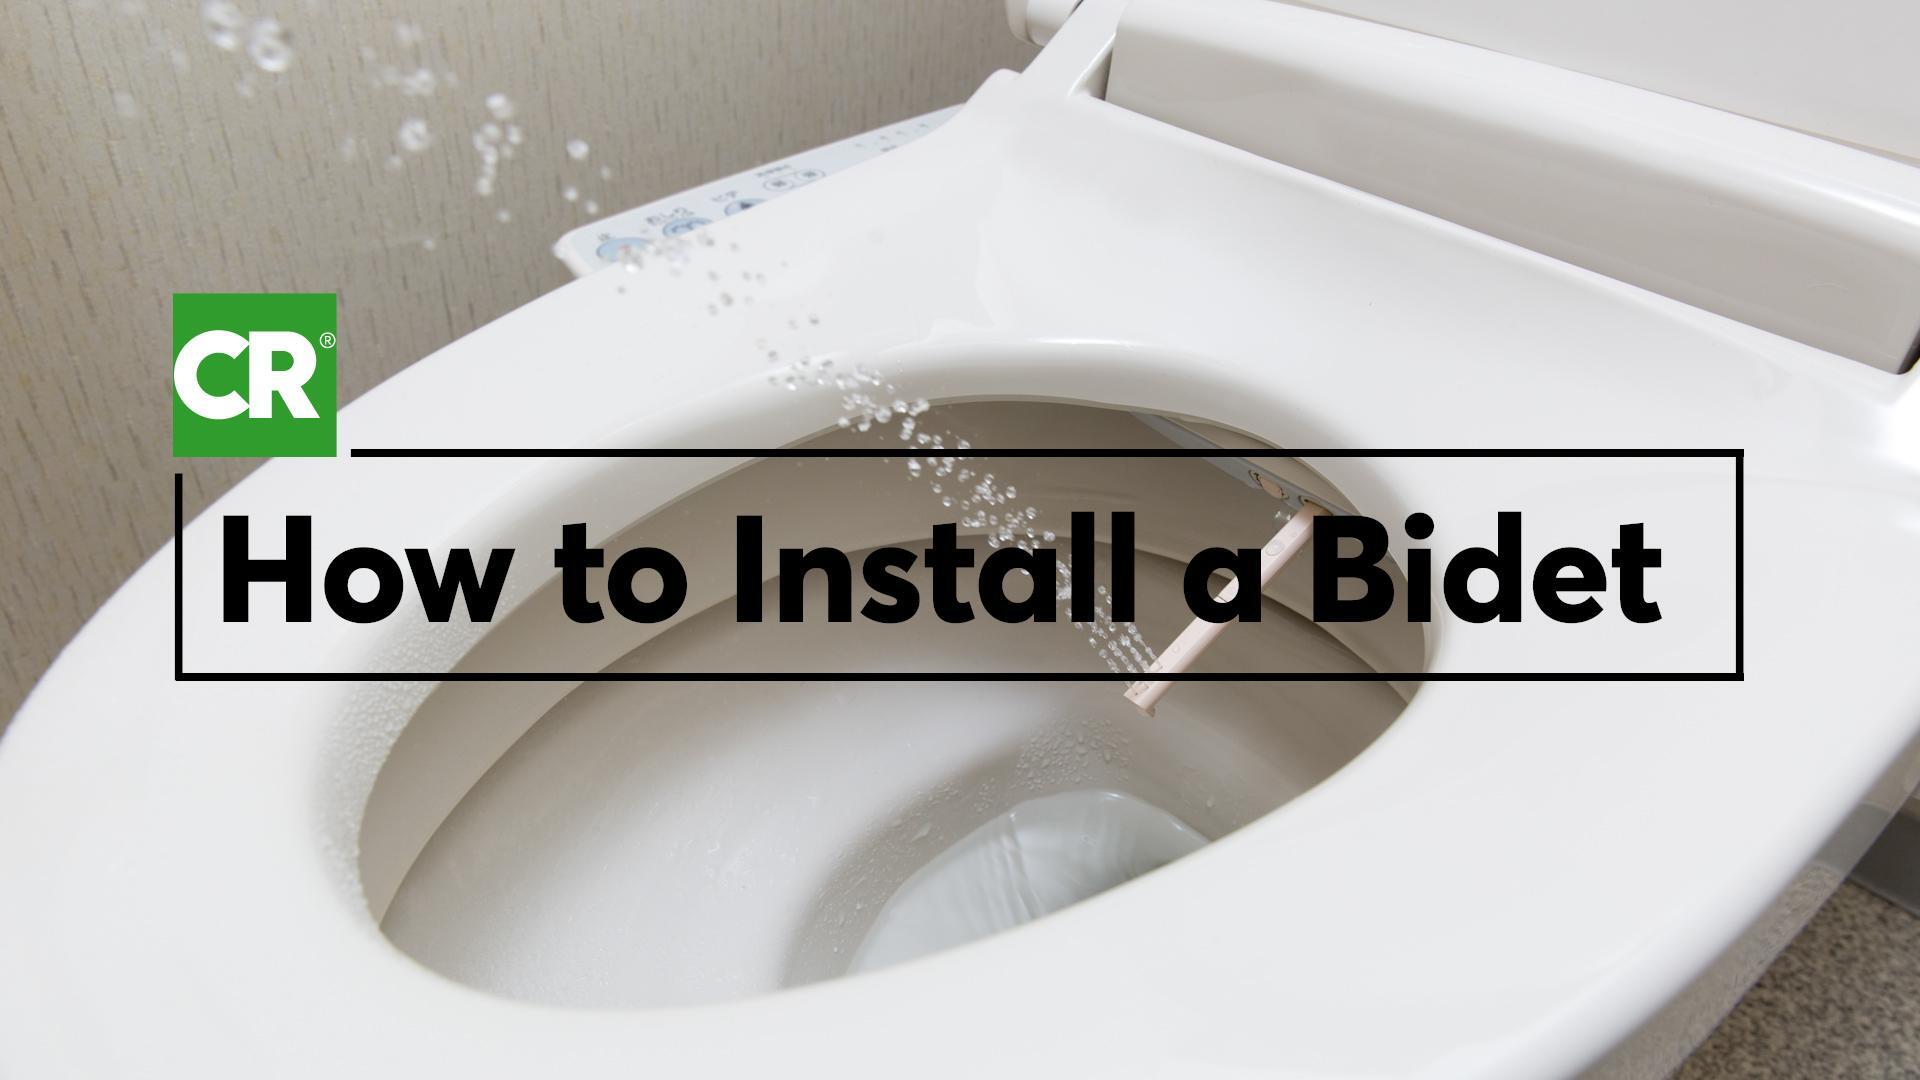 Bidet Toilet Seat Installation: A Step-by-Step Guide